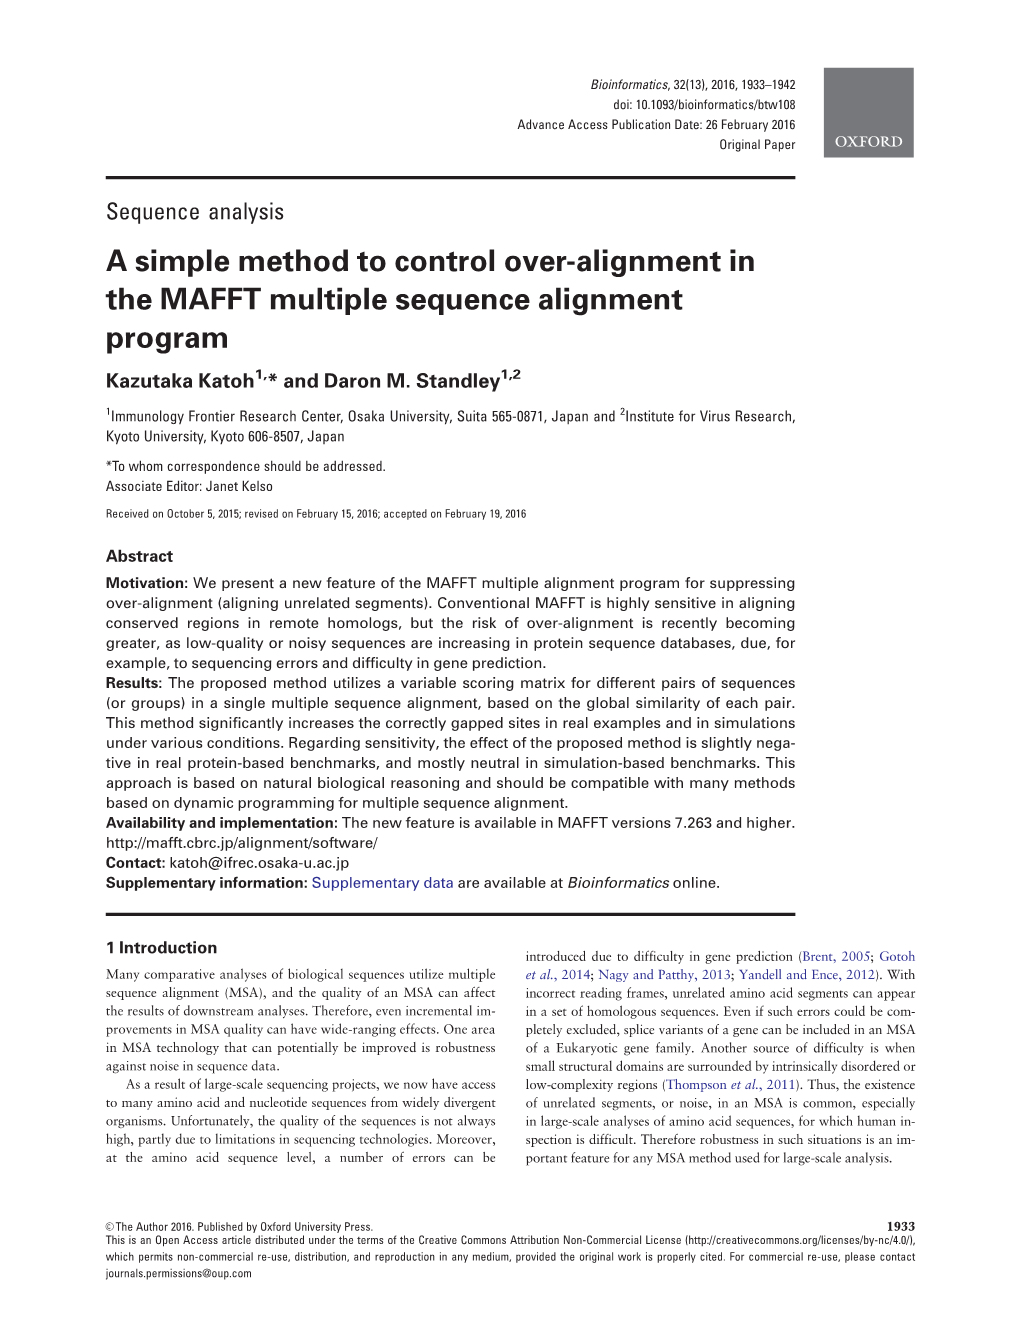 A Simple Method to Control Over-Alignment in the MAFFT Multiple Sequence Alignment Program Kazutaka Katoh1,* and Daron M